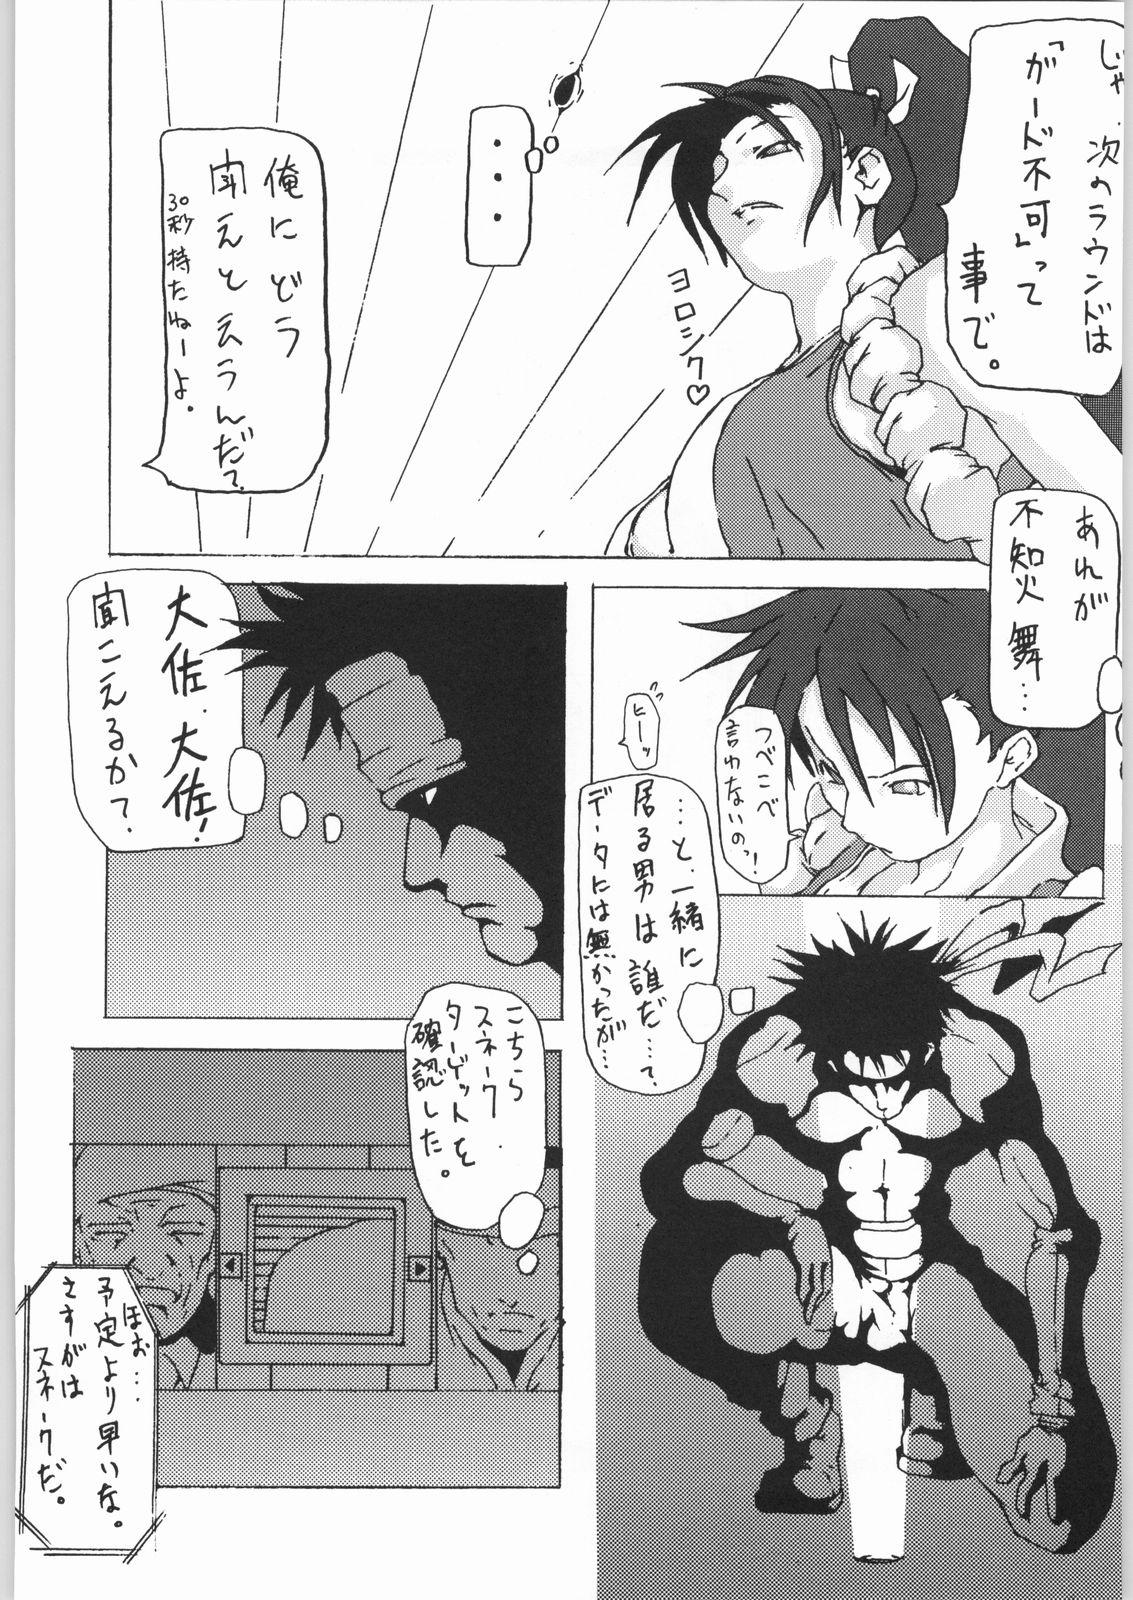 Boots Shiranui - King of fighters Oral Sex - Page 6